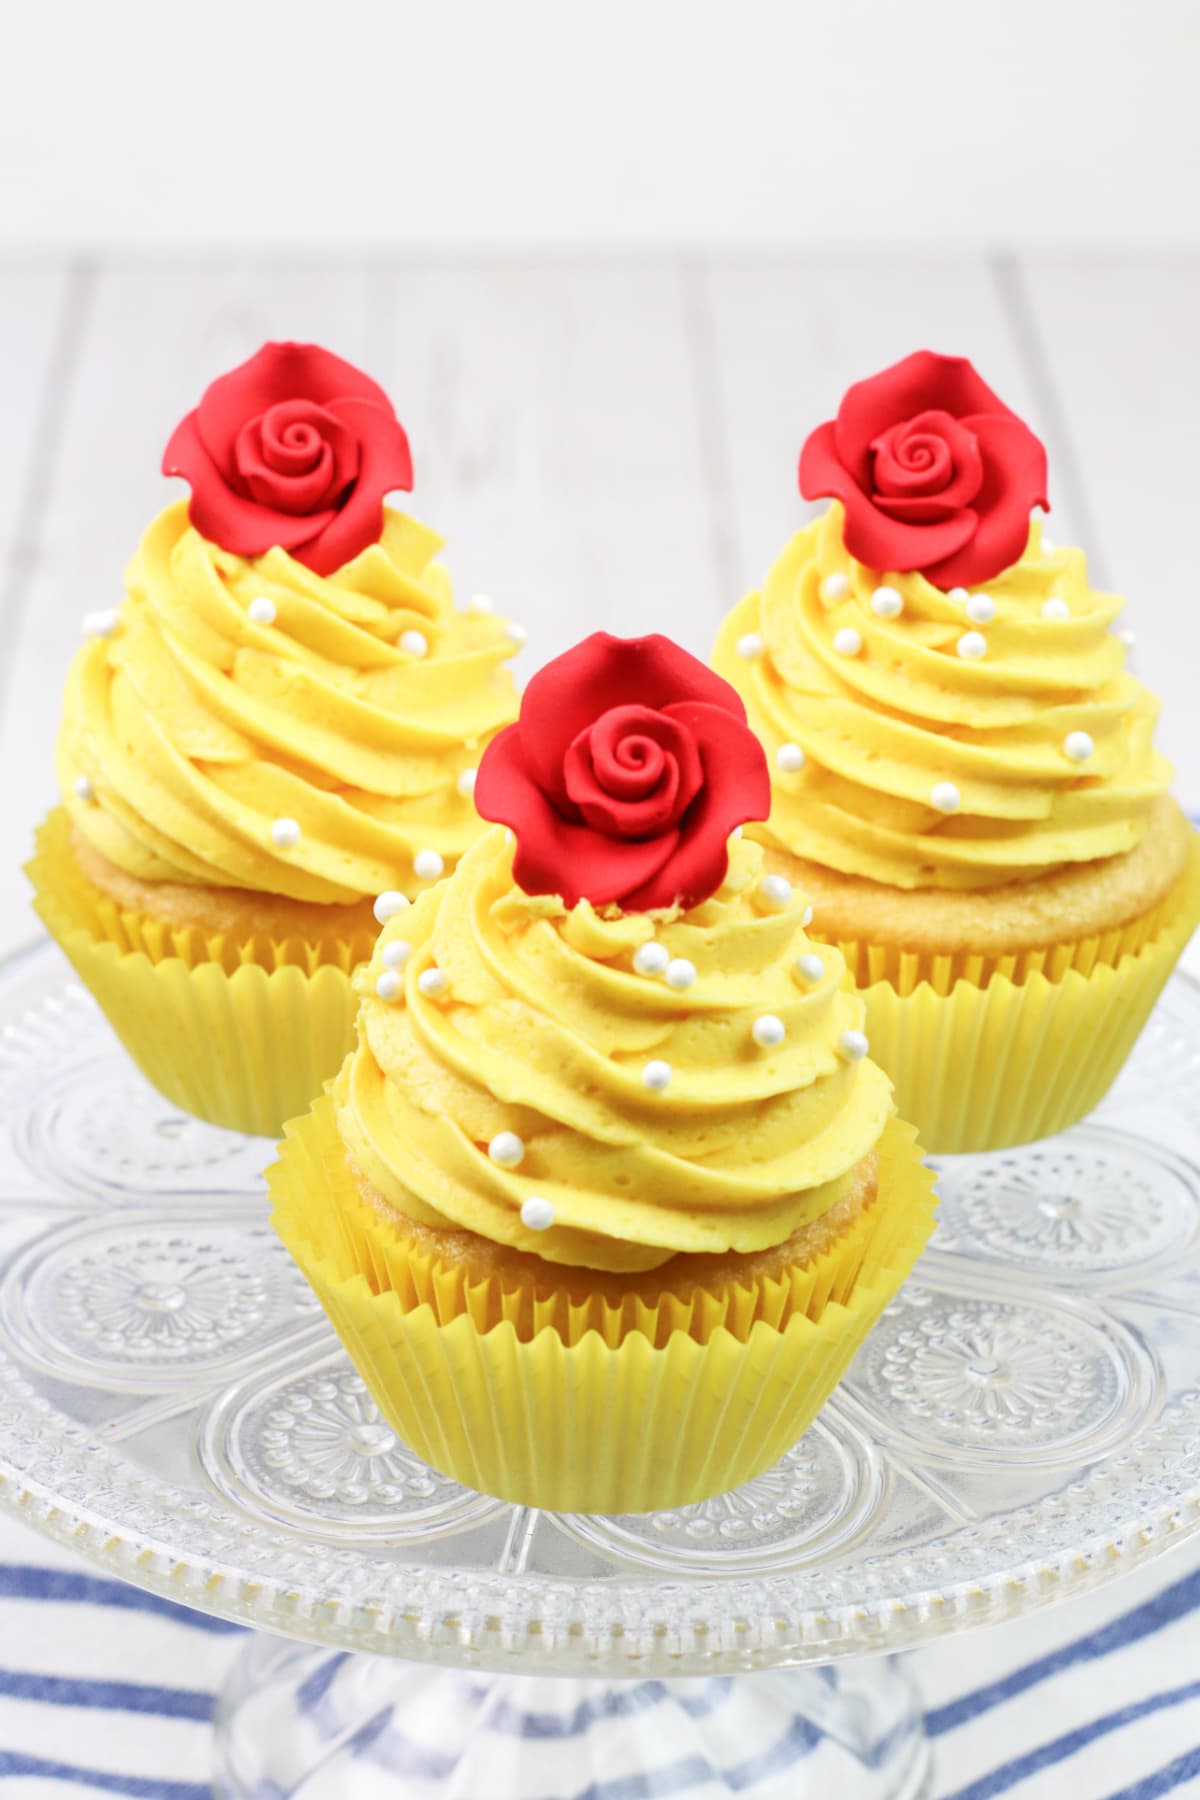 Beauty And The Beast cupcakes on glass plate